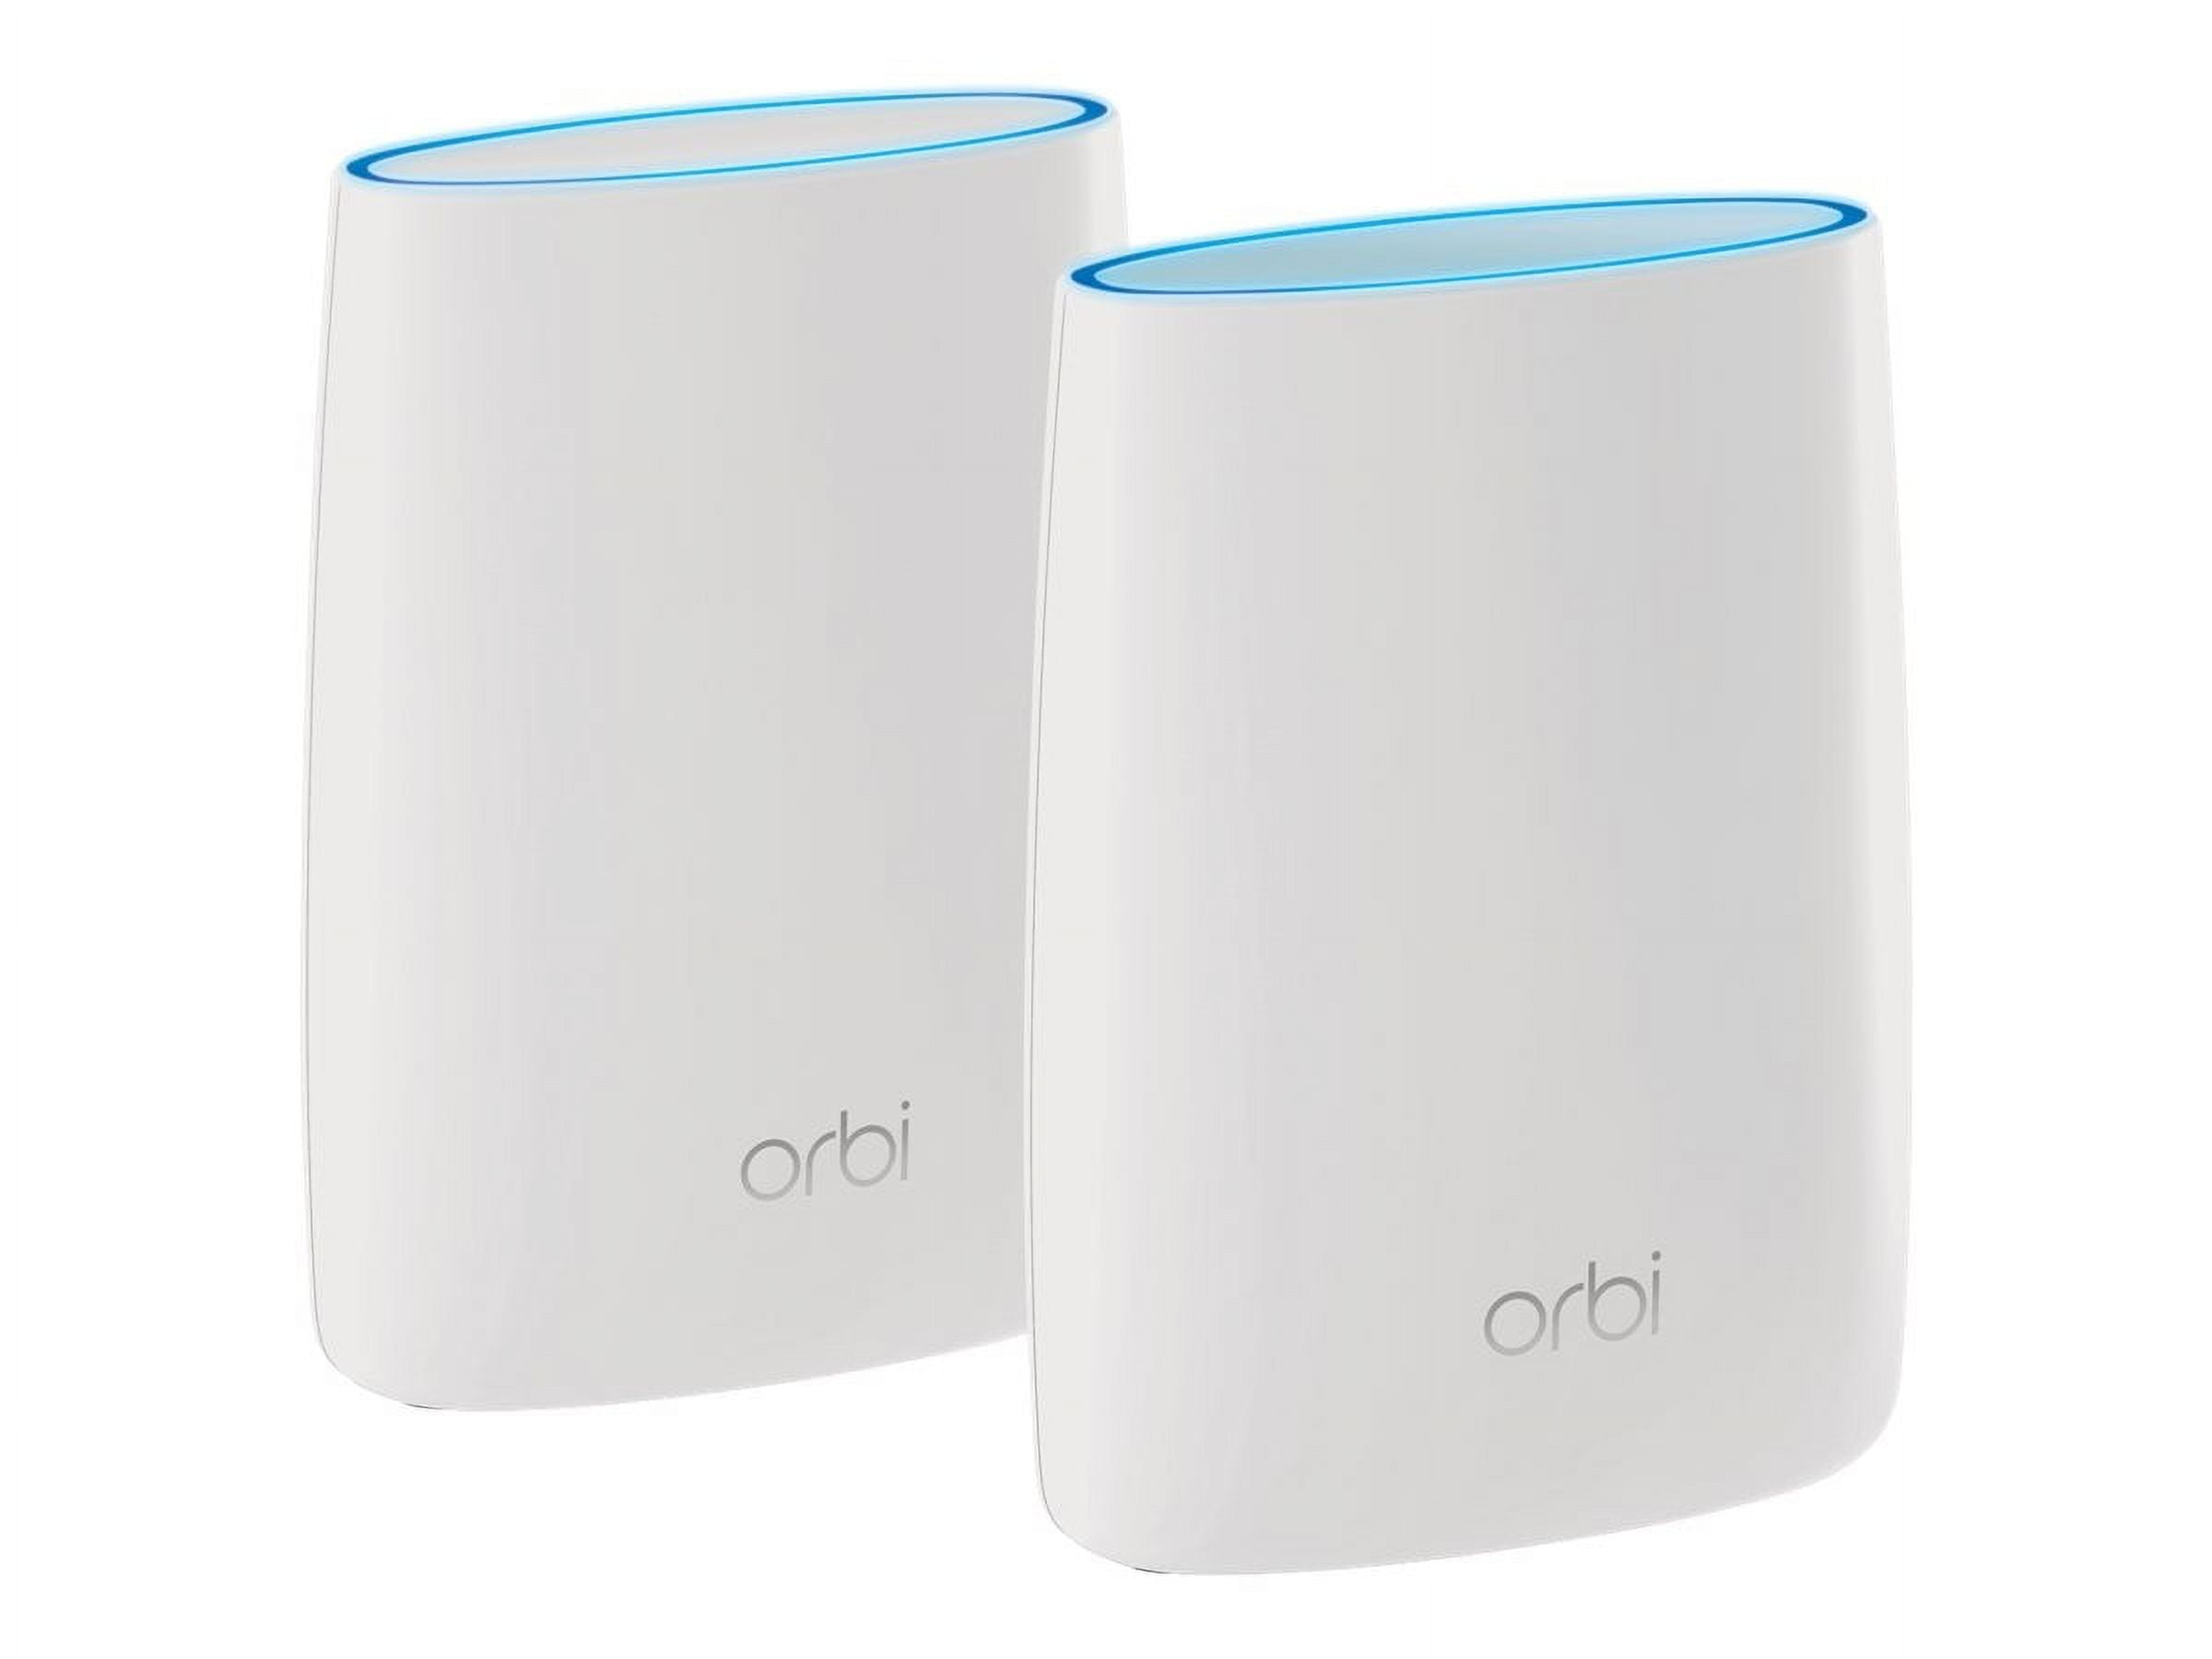 NETGEAR - Orbi AC3000 Tri-Band Mesh WiFi System with Router + 1 Satellite  Extender, 3Gbps (RBK50) 